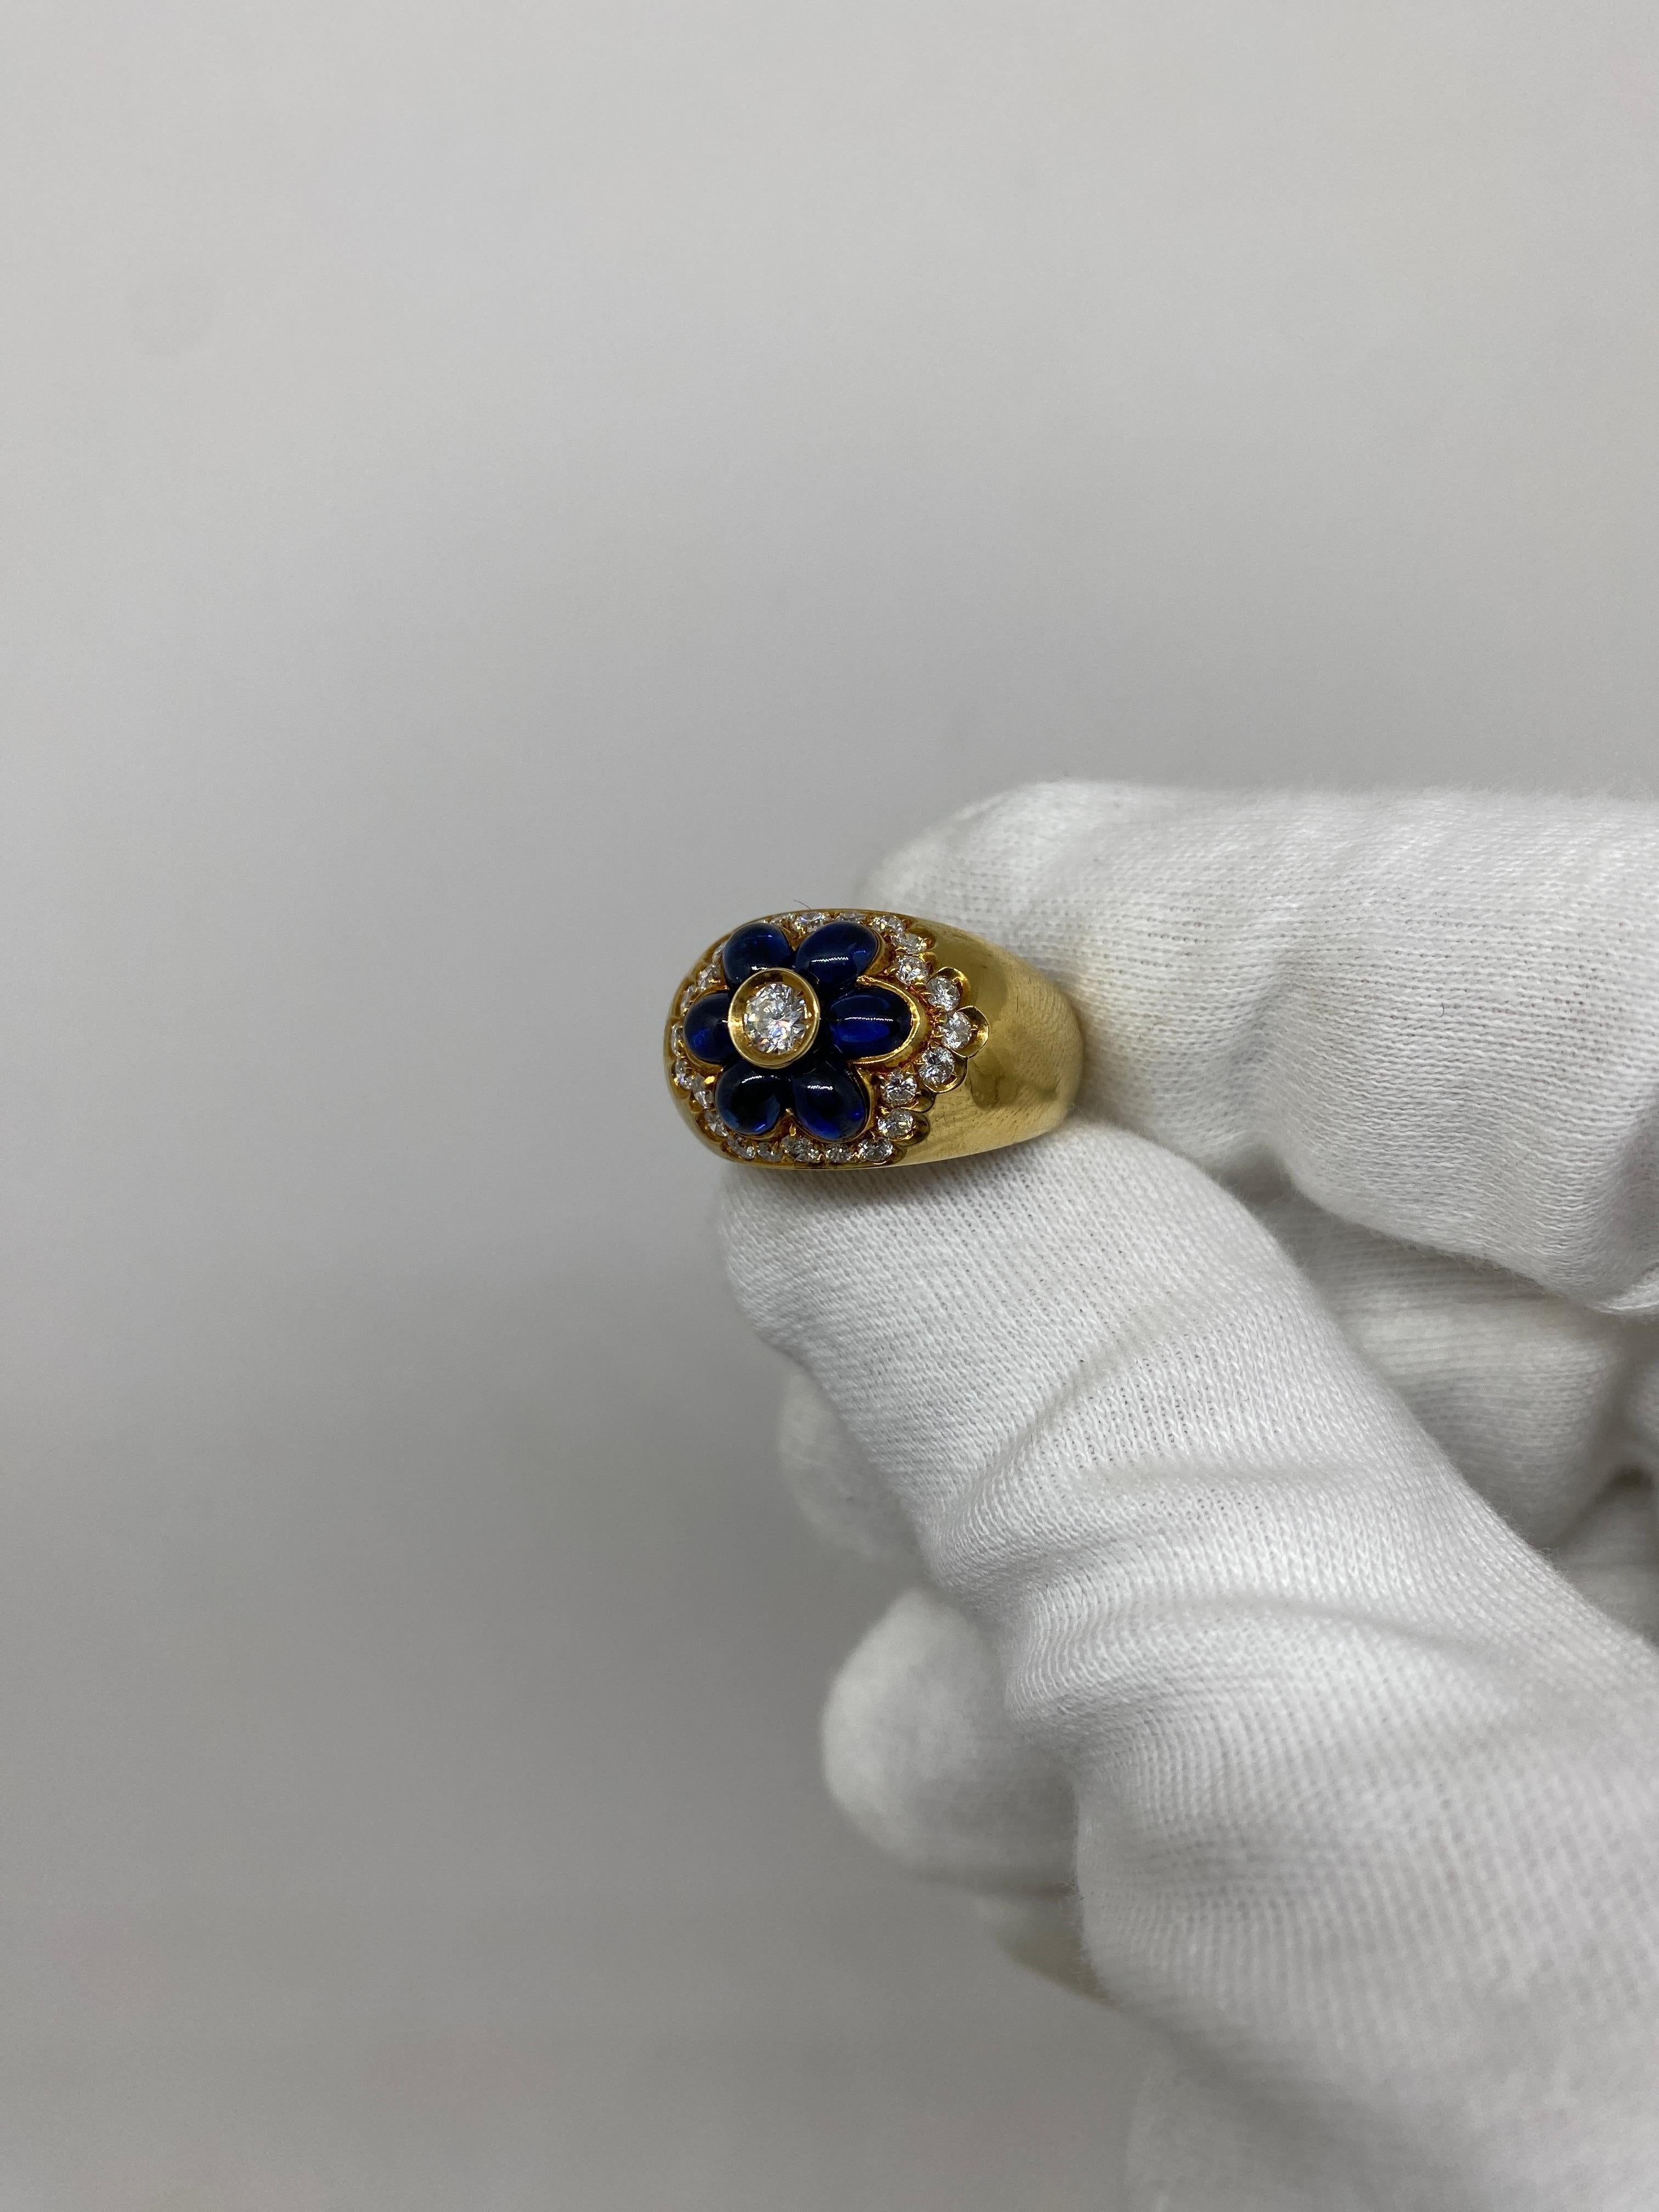 Band ring made of 18kt yellow gold with natural brilliant-cut diamonds for ct.0.88 and cabochon-cut blue sapphires for ct .3.26

Welcome to our jewelry collection, where every piece tells a story of timeless elegance and unparalleled craftsmanship.